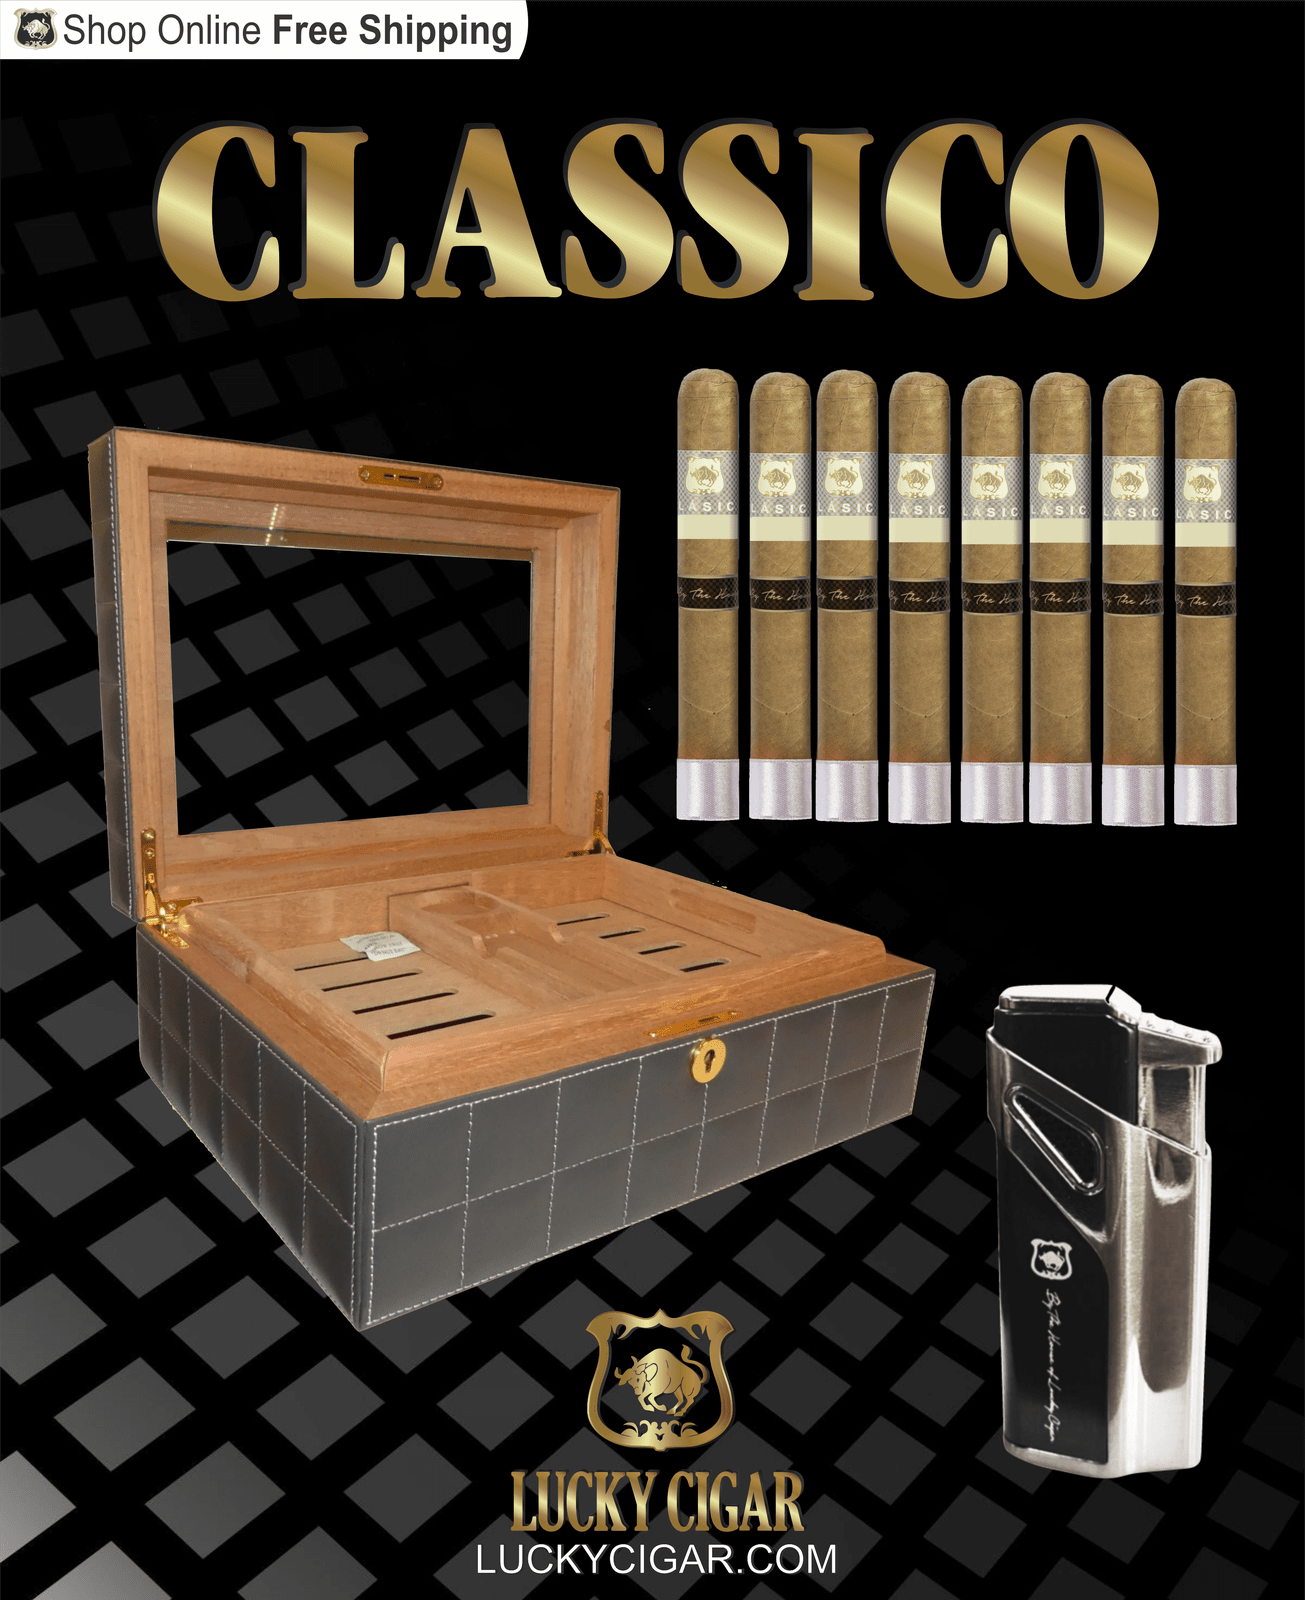 Lucky Cigar Sampler Sets: Set of 8 Classico Toro Cigars with Desk Humidor, Torch